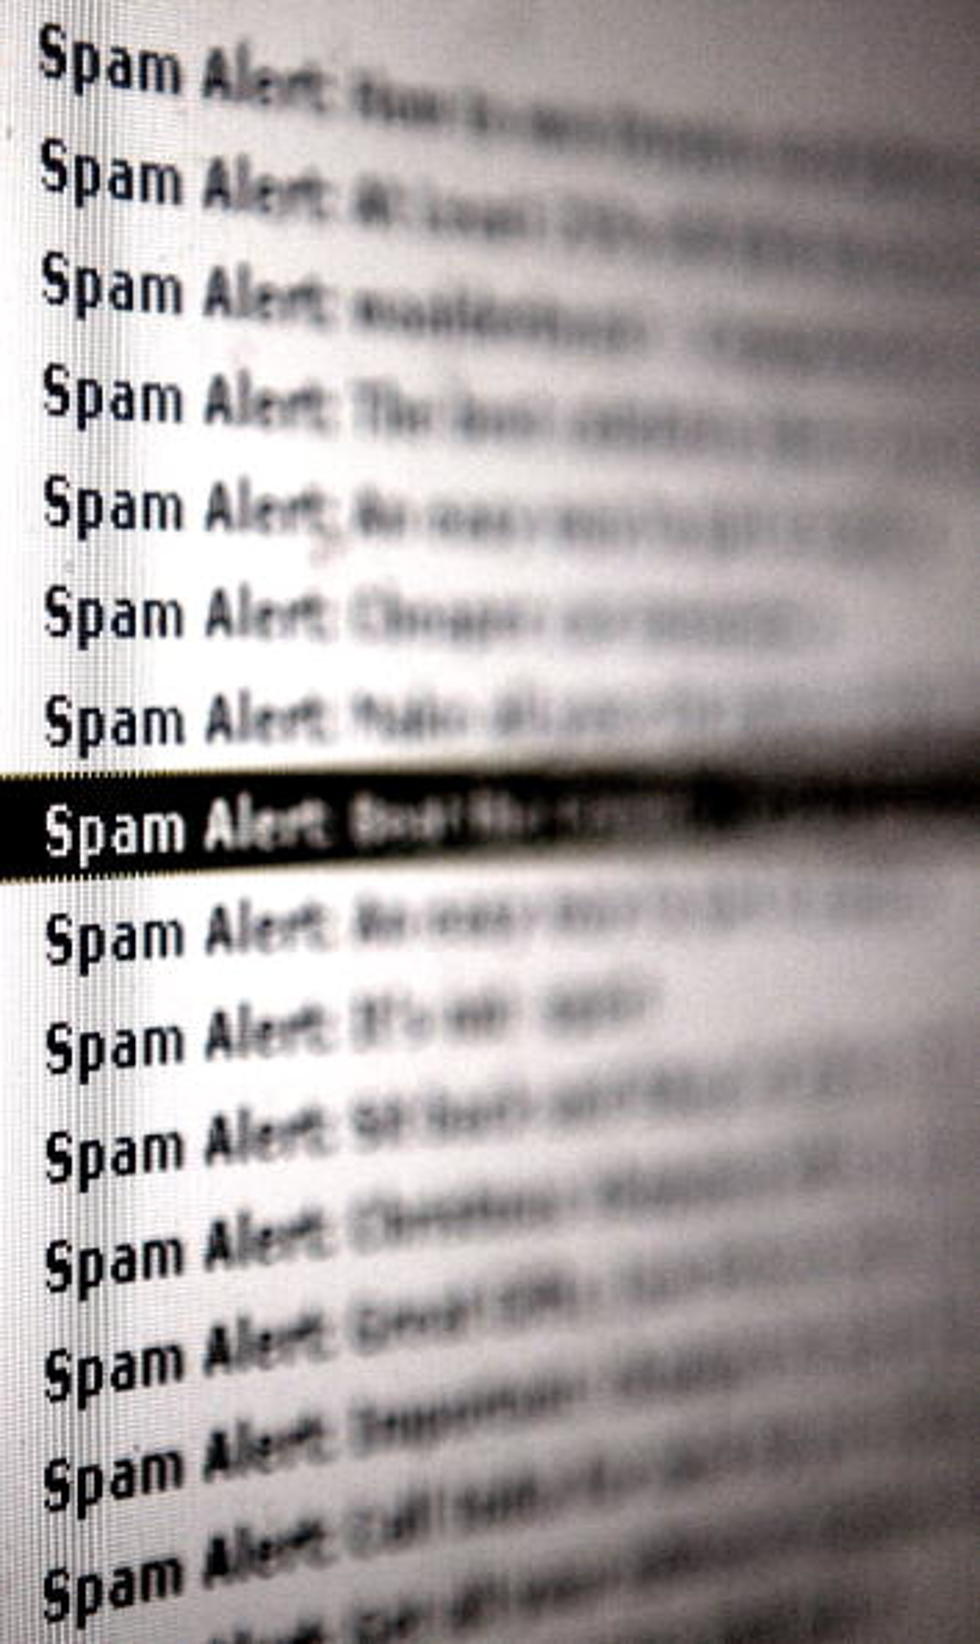 Spam, That Annoying E-Mail